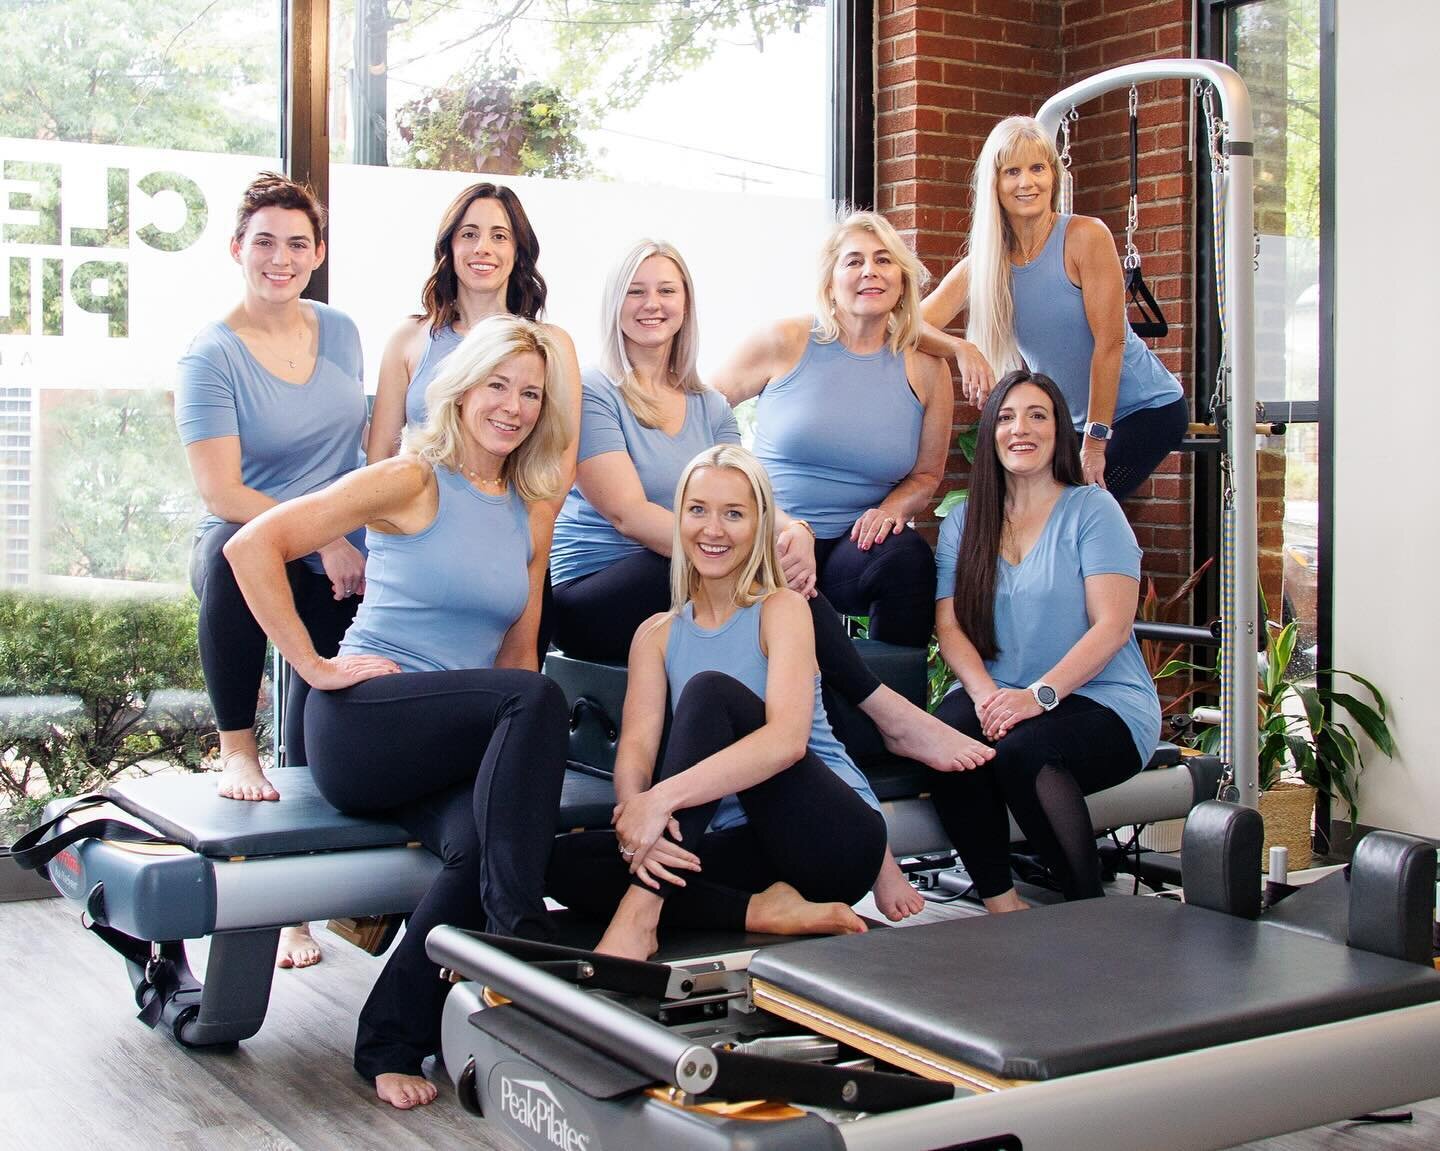 Happy international women&rsquo;s day! We are very fortunate to have such a strong woman lead our team💕 @juliatrovato 

 #pilates #pilatesstudio #sewickleypa #pittsburghpilates #sewickley #pilatesworkout #pilatesinstructor #pilatesbody #pikateslover